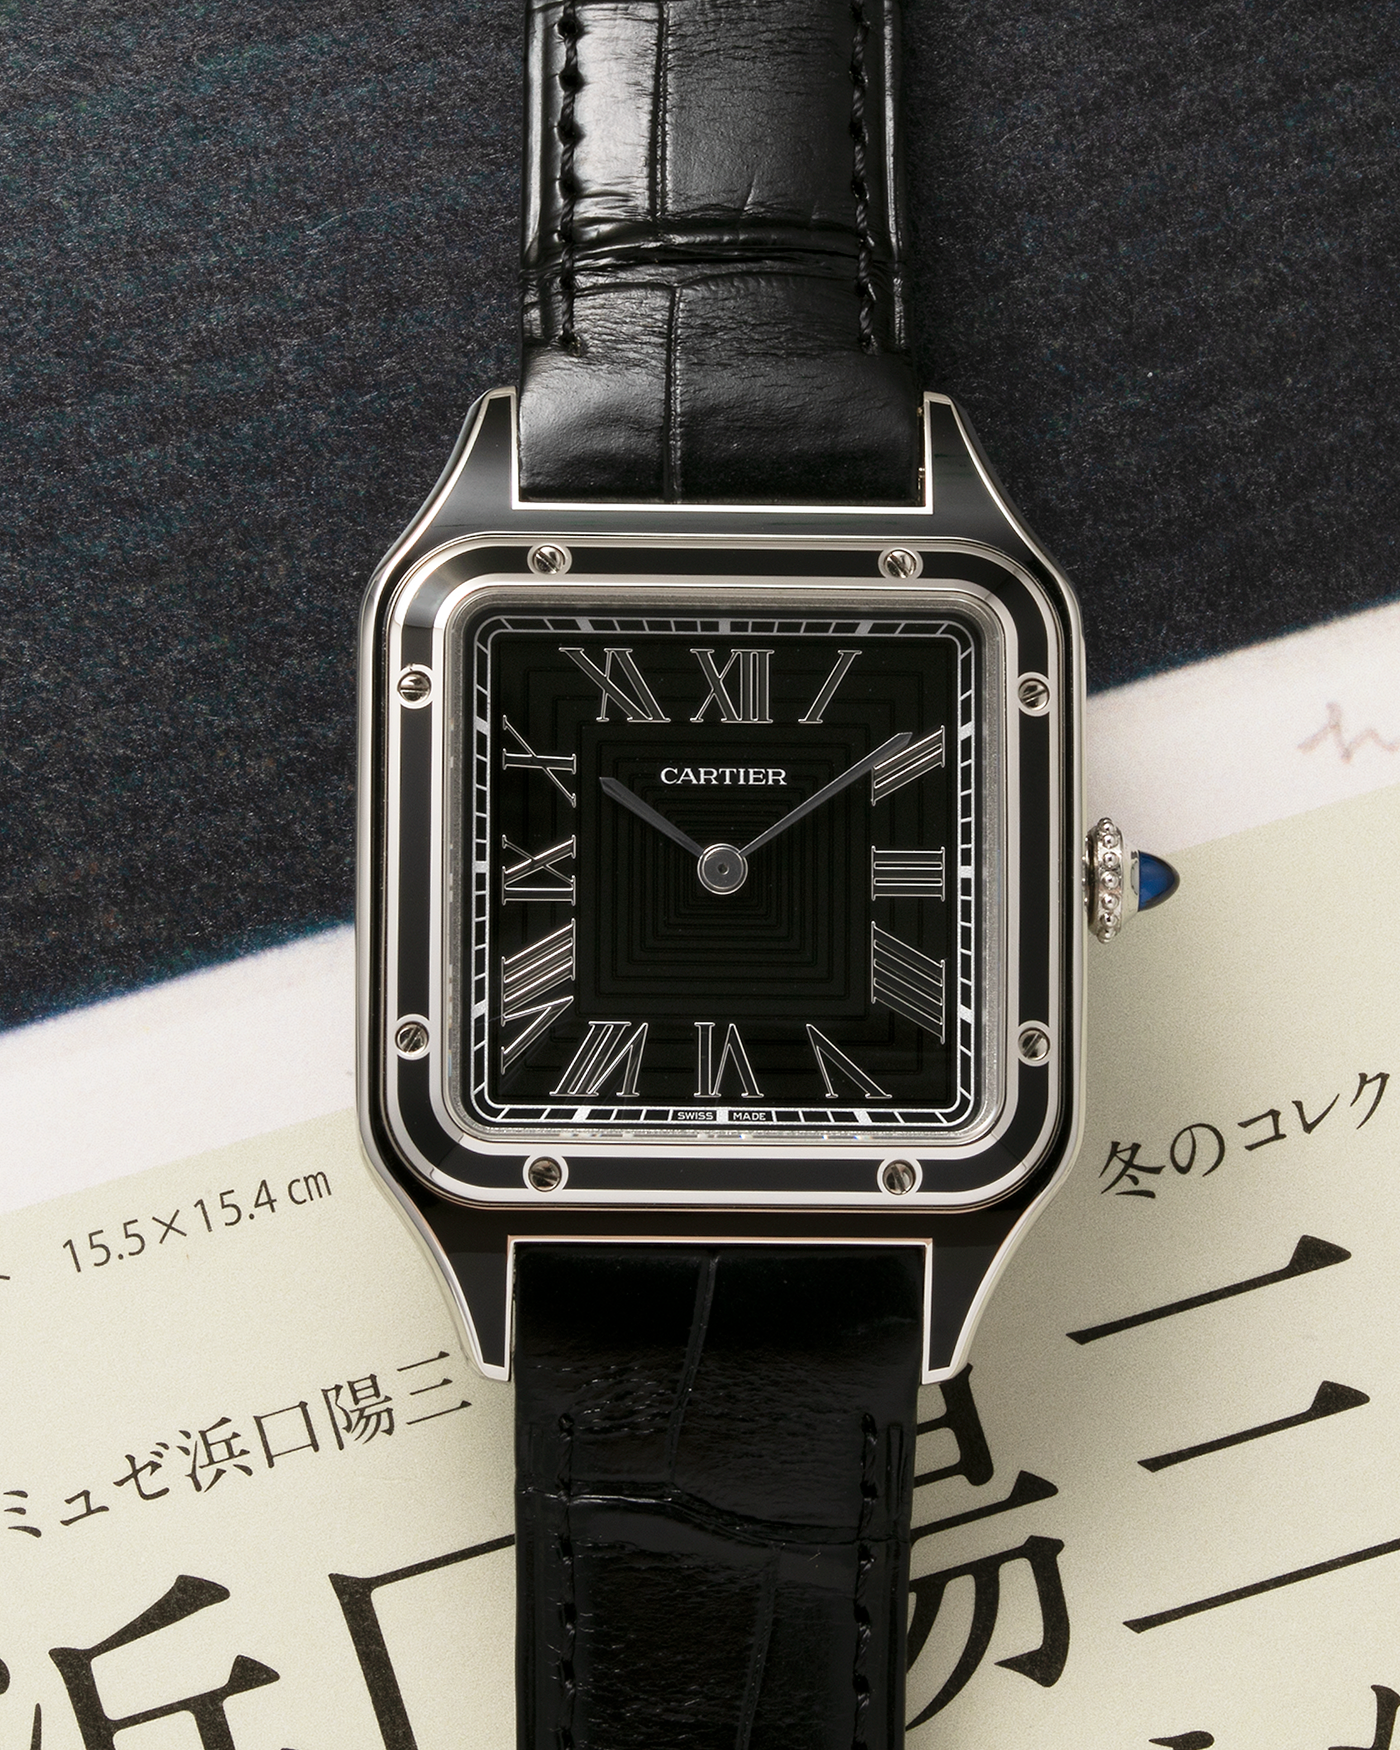 Brand: Cartier Year: 2023 Model: Santos-Dumont Large Reference: CRWSSA0046 Material: Stainless Steel, Black Lacquer Movement: Cartier Cal. 430 MC, Manual-Winding Case Diameter: 43.5mm x 31.4mm Strap: Cartier Black Alligator Leather Strap with Signed Stainless Steel Tang Buckle